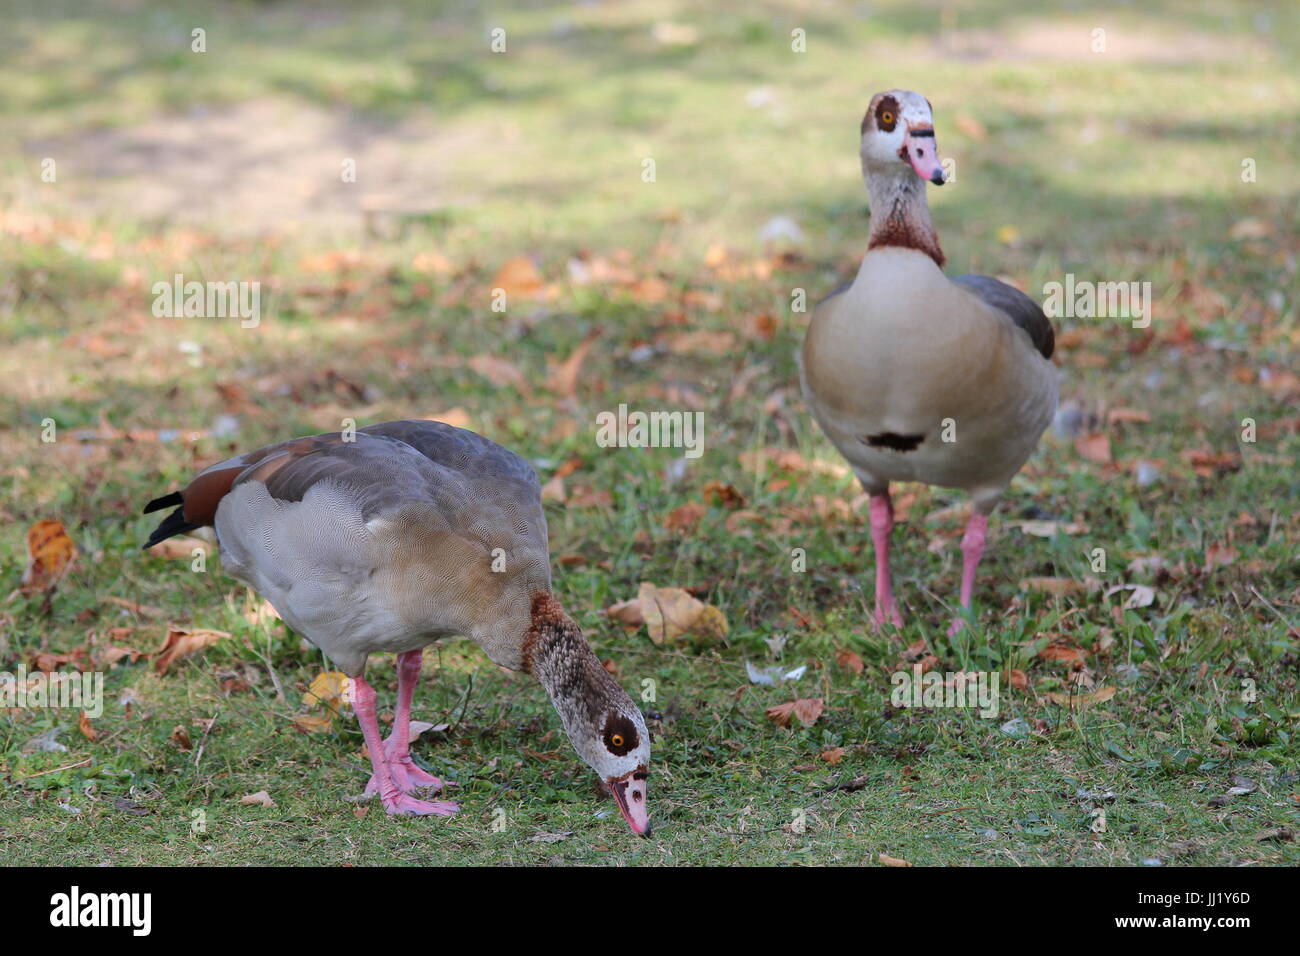 Alopochen aegyptiaca - A pair of Egyptian Geese in the park Stock Photo